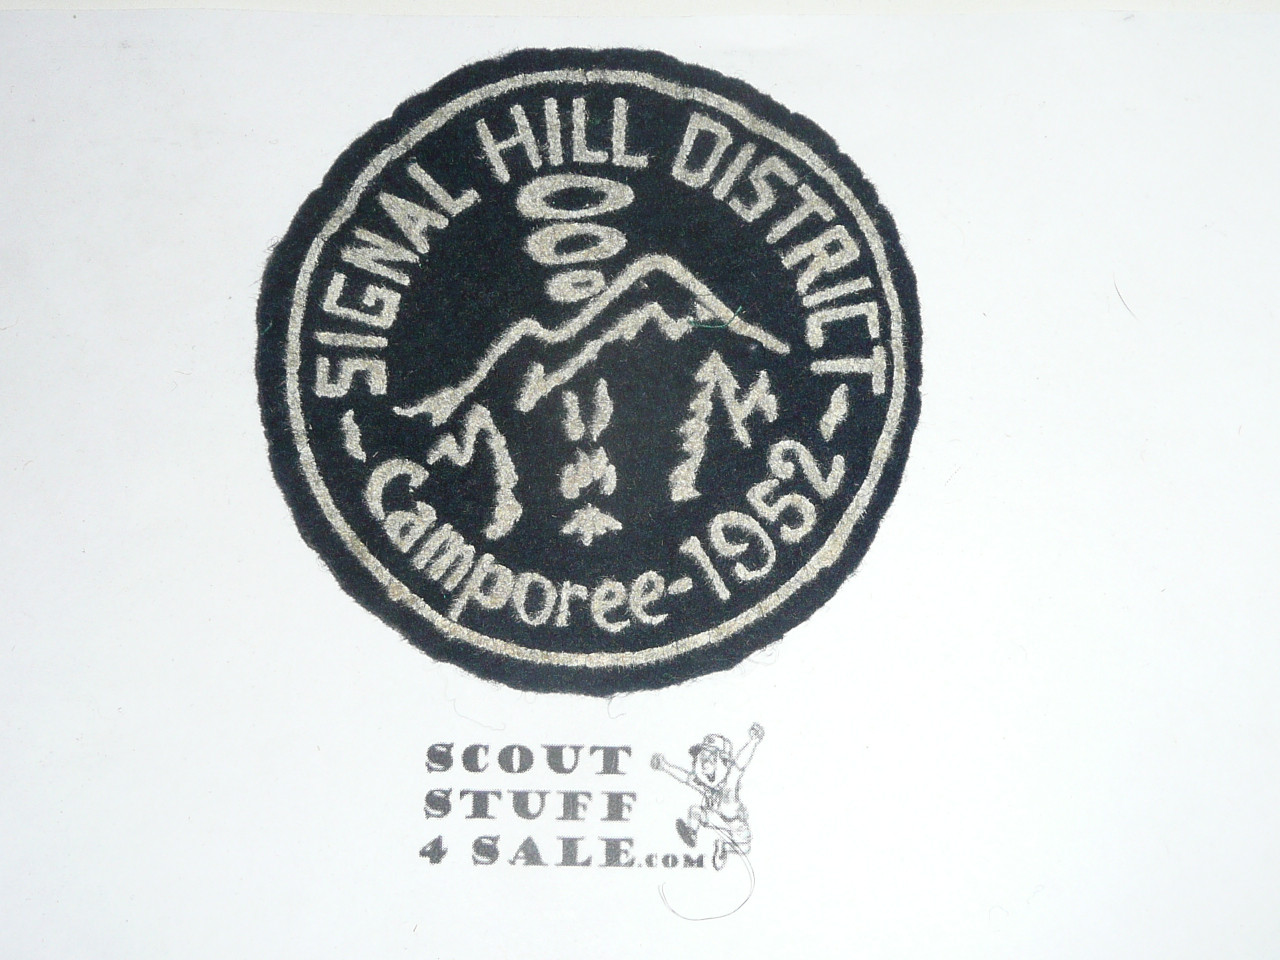 1952 Signal Hill District Felt Camporee Patch, used